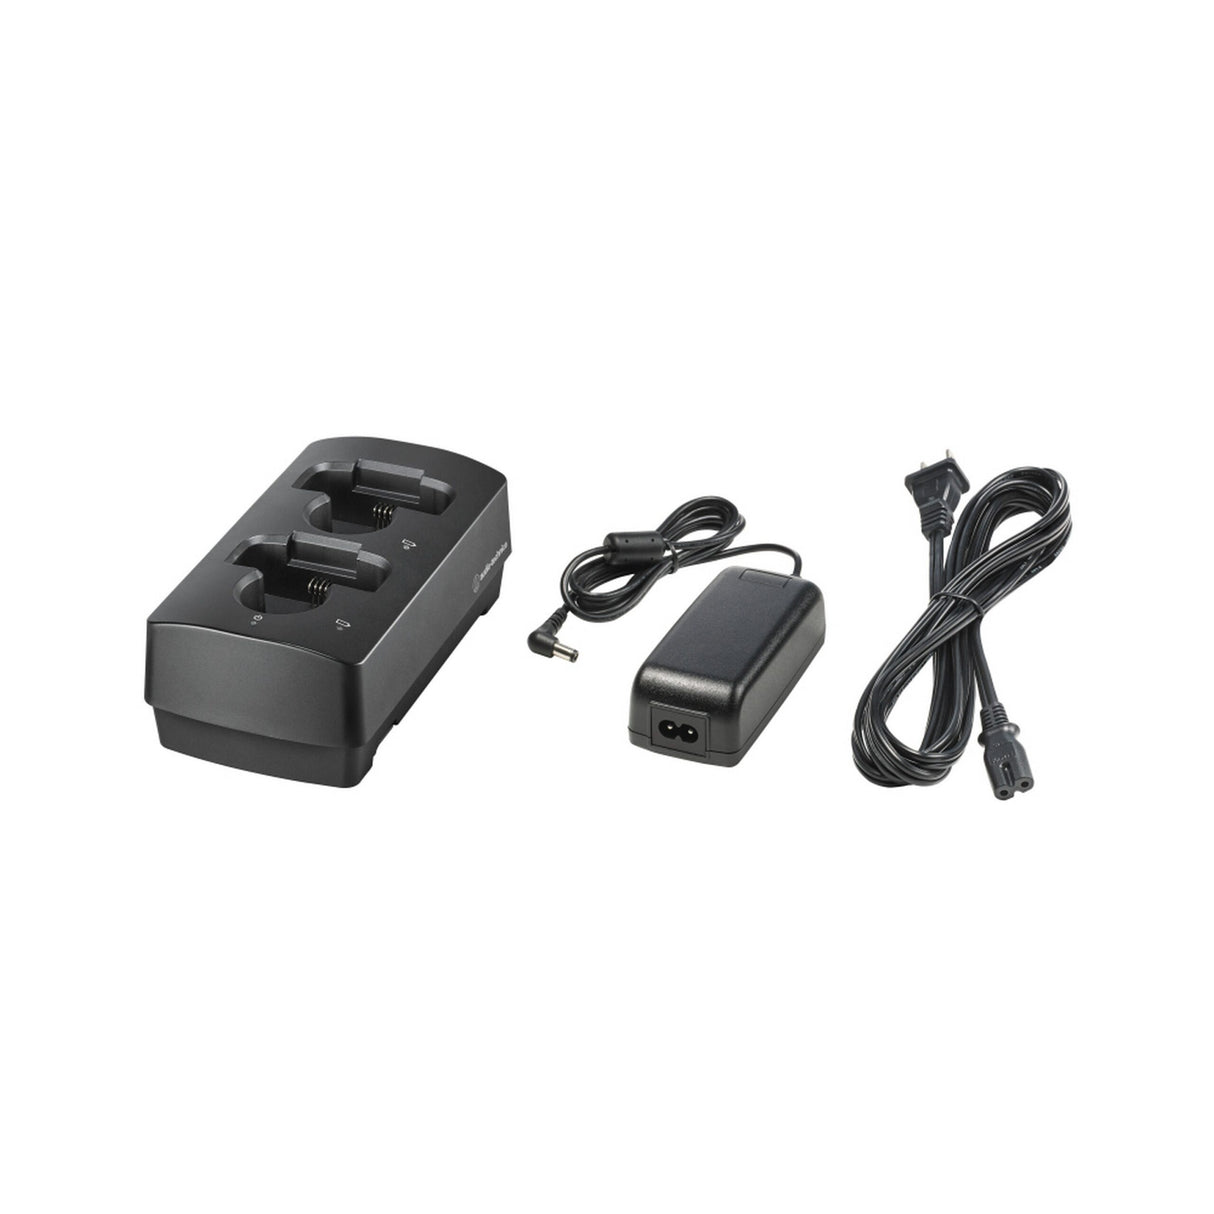 Audio-Technica ATW-CHG3NAD Networked 2-Bay Charging Station with AC Adapter